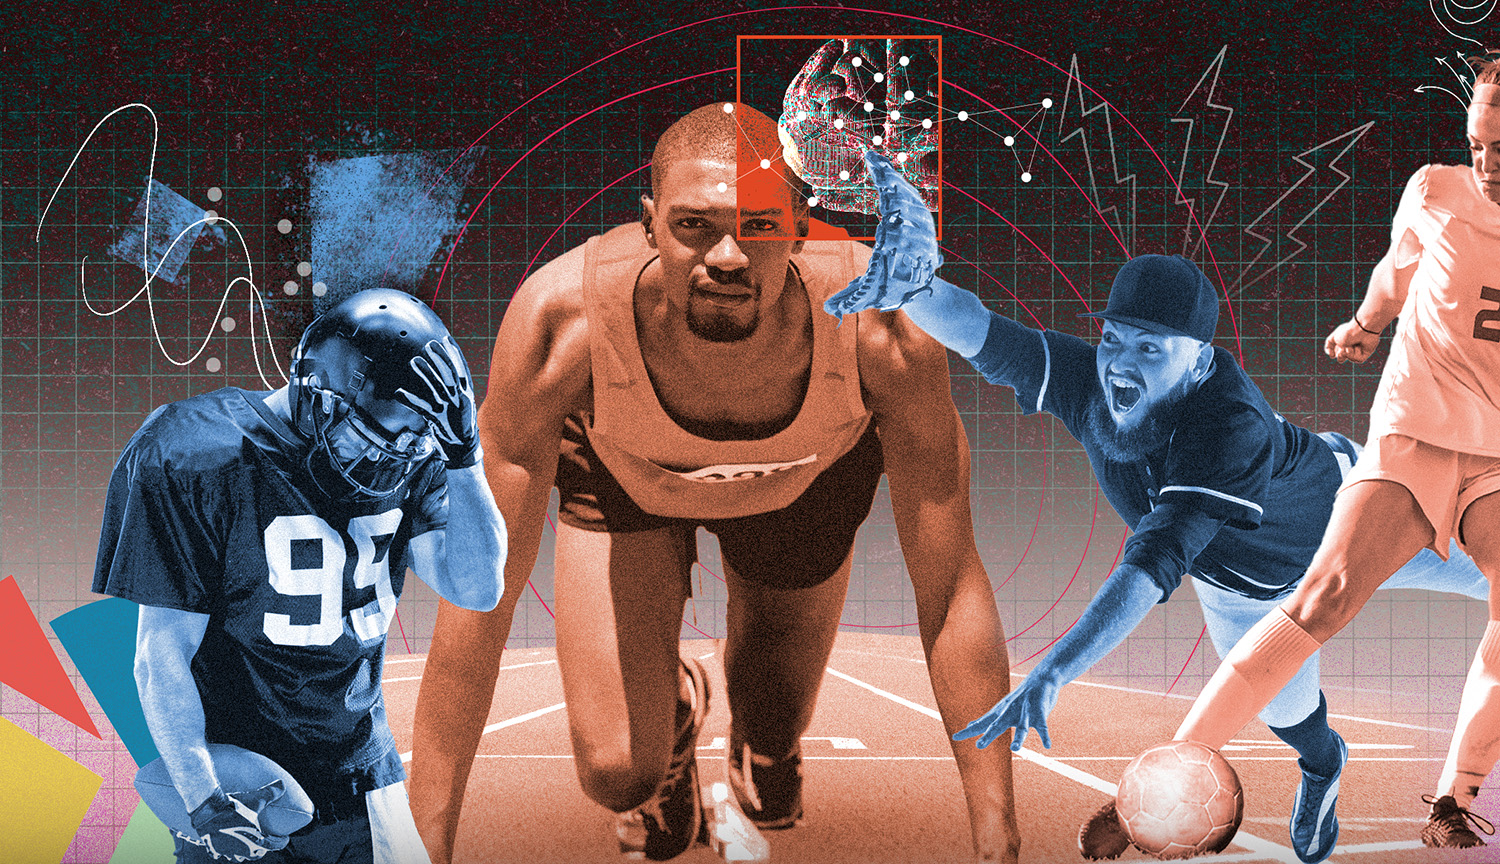 A collage of athletes featuring a dismayed football player, a focused soccer player, a runner at the starting line and a baseball player diving for the ball